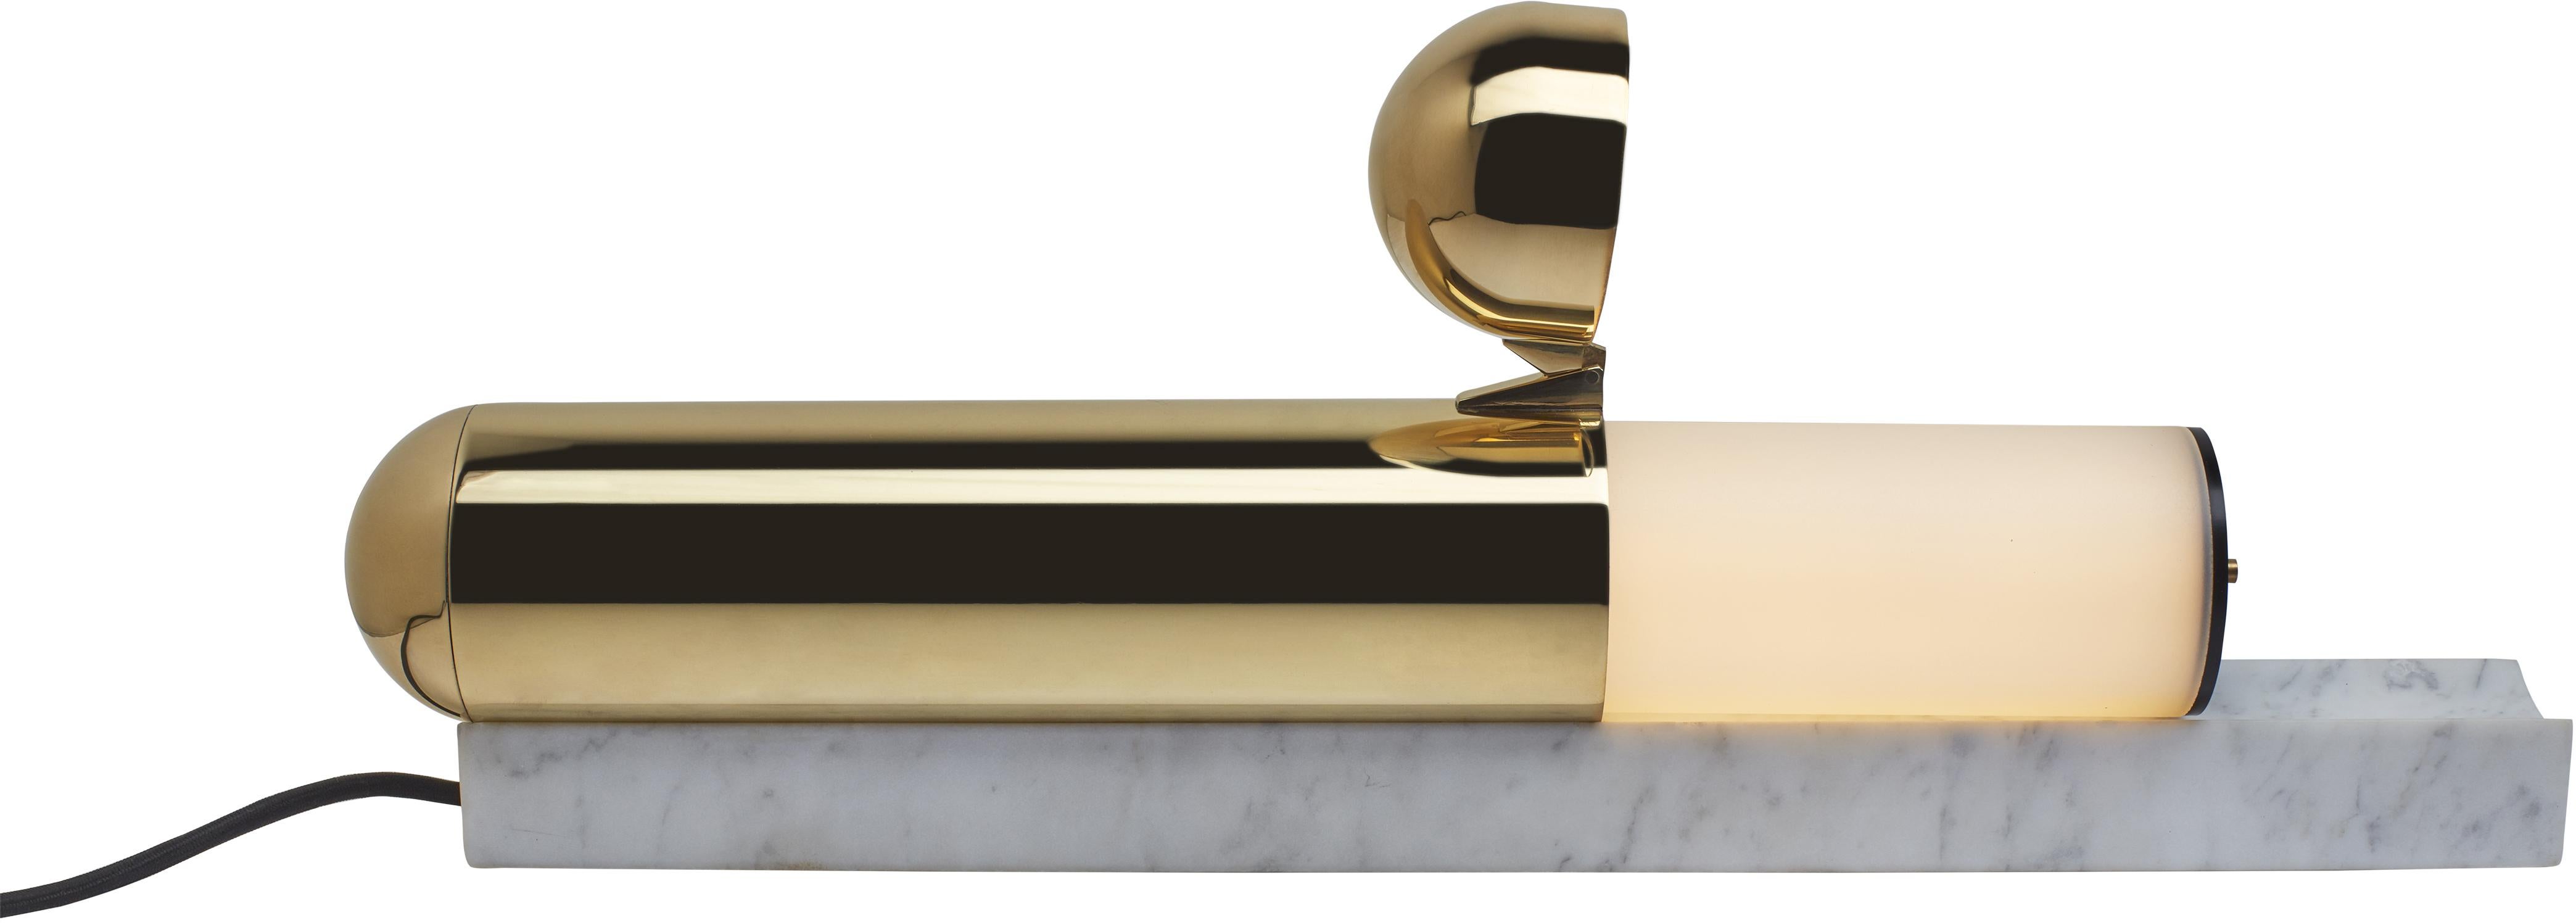 DCW Editions ISP Table Lamp in Brass with White Marble by Ilia Sergeevich Potemine
 
 What is it ? A mystery ? An object from outer space ? From what period of history did it emerge? Which era ? Who could have invented such an object ? These are the